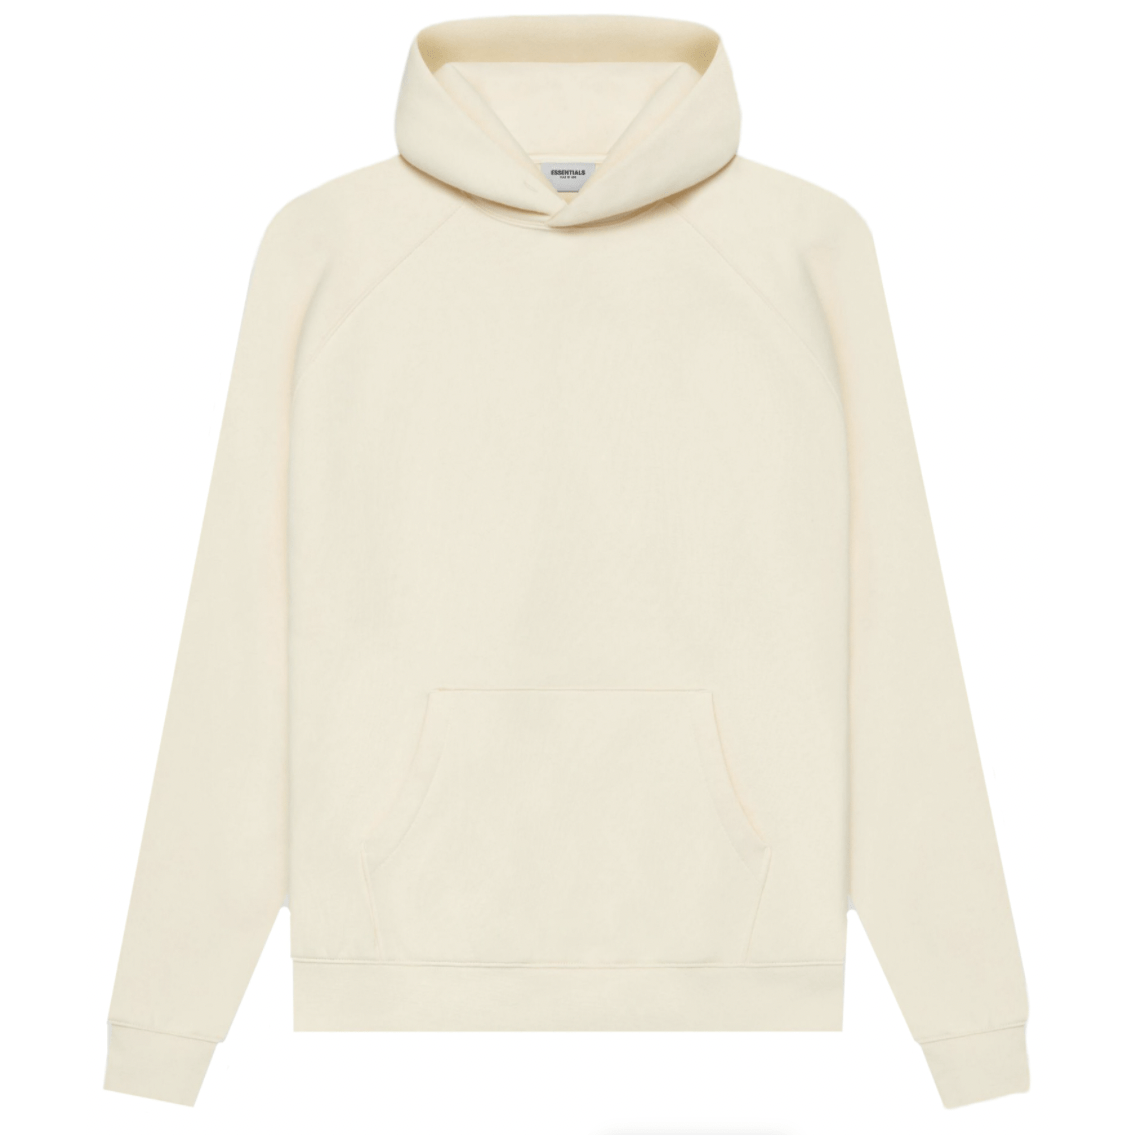 FEAR OF GOD ESSENTIALS Pull-Over Hoodie (SS21) Cream/Buttercream